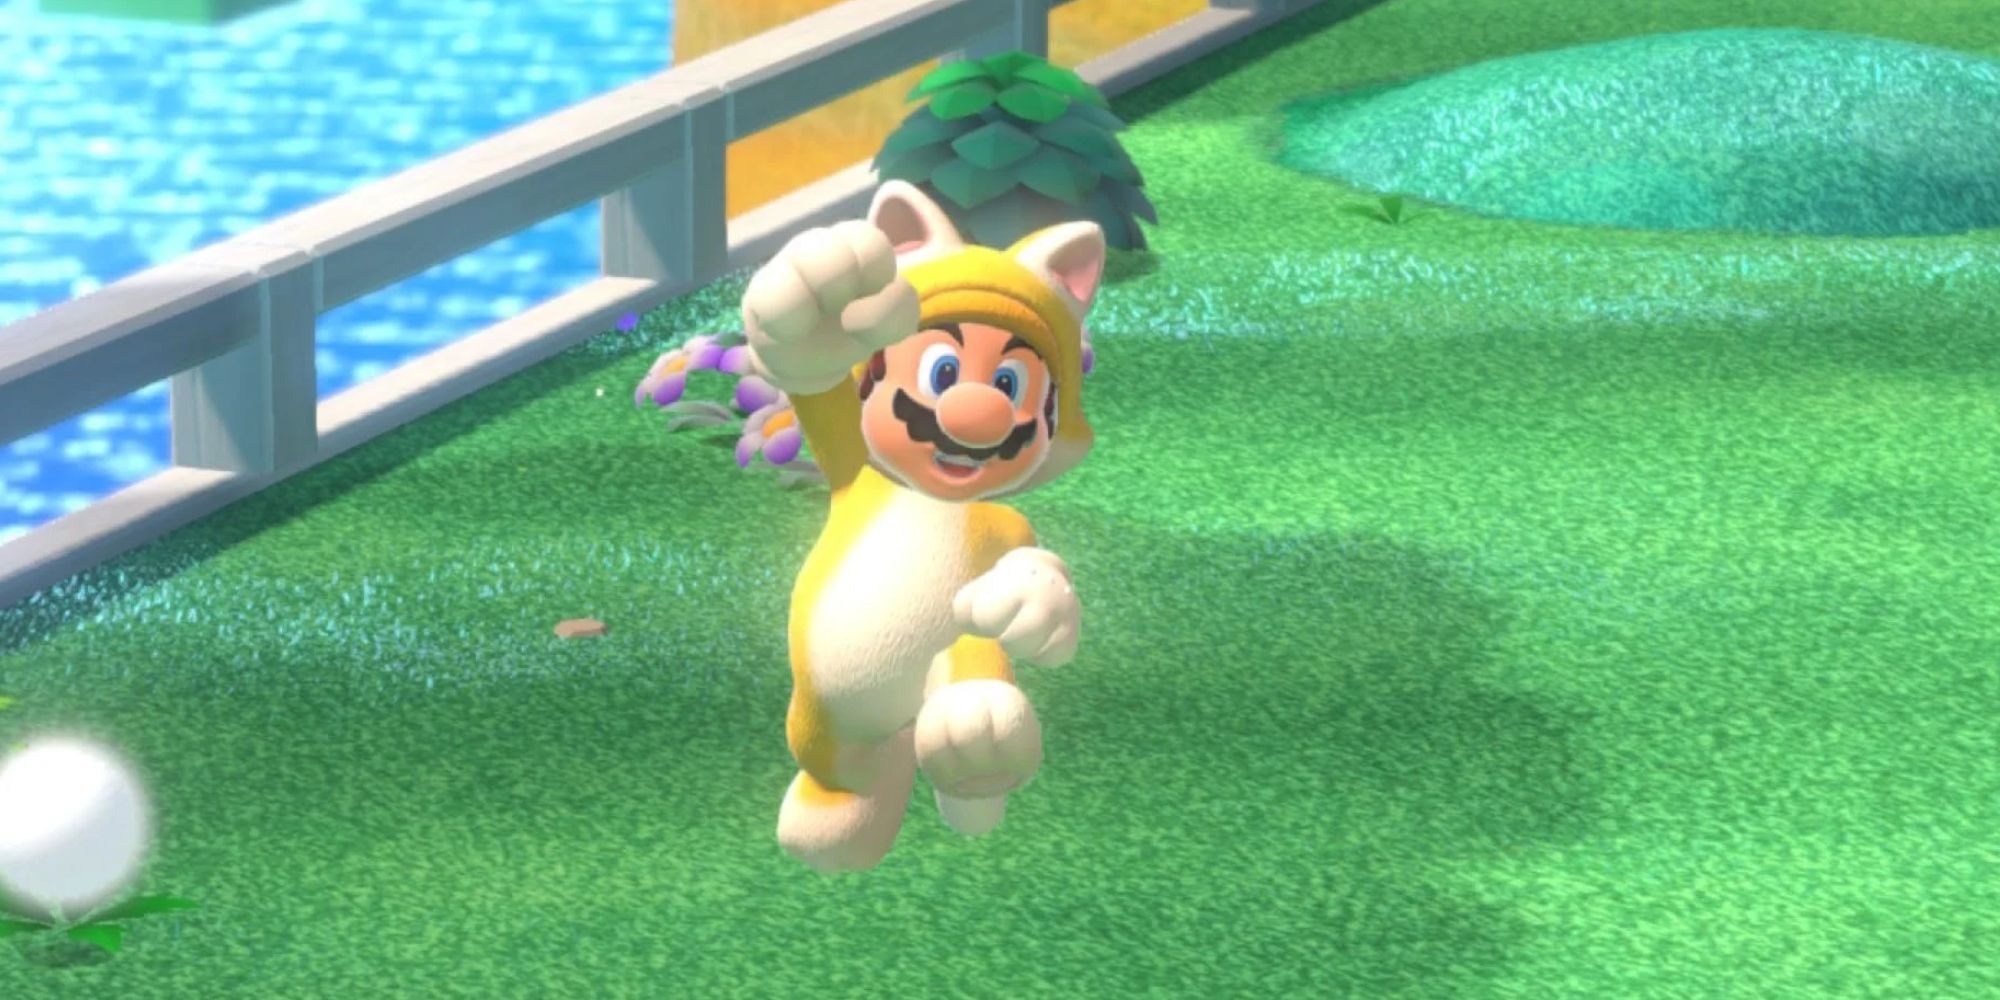 Super Mario 3D World Cat Mario is jumping on the grass